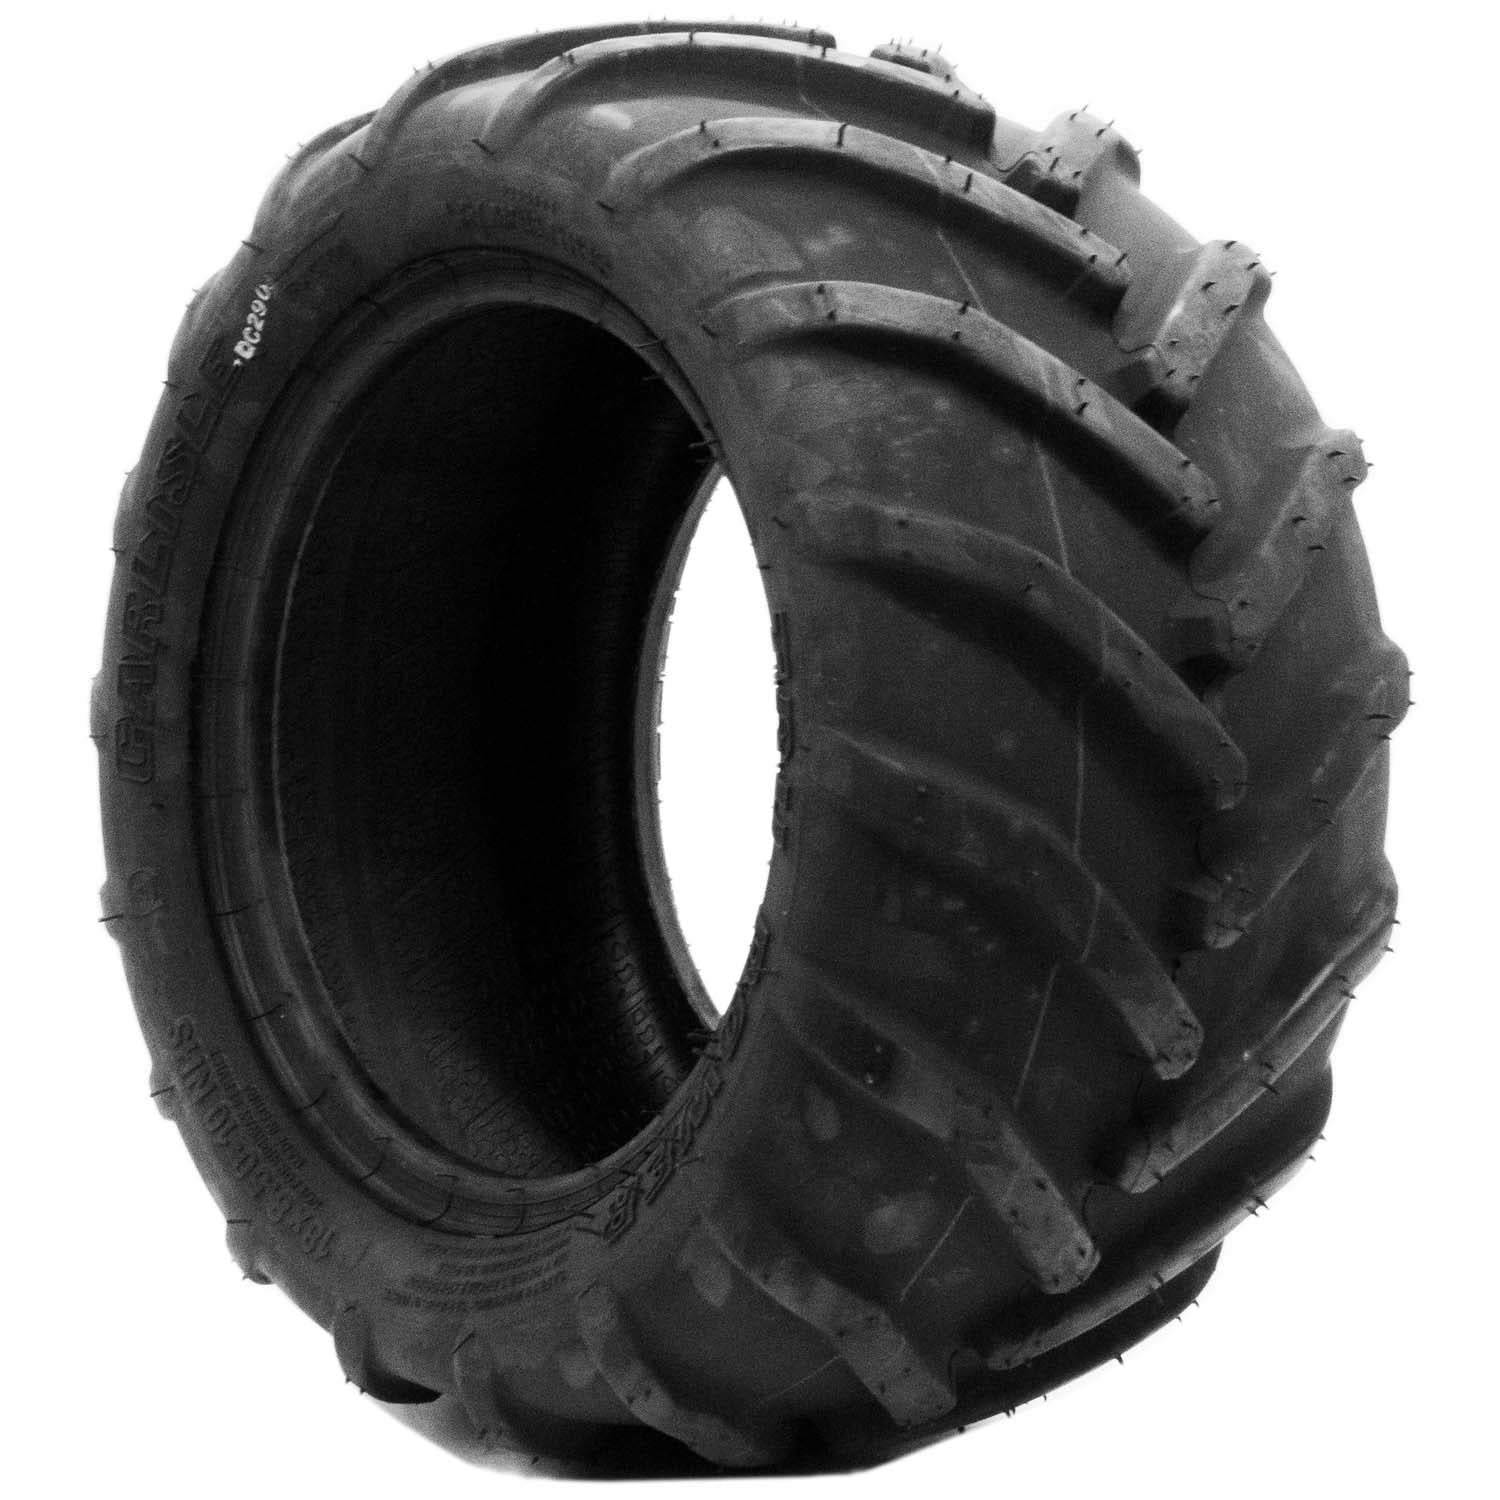 Carlisle Tru Power Lawn and Garden Traction Tire 4ply 23x10.50-12